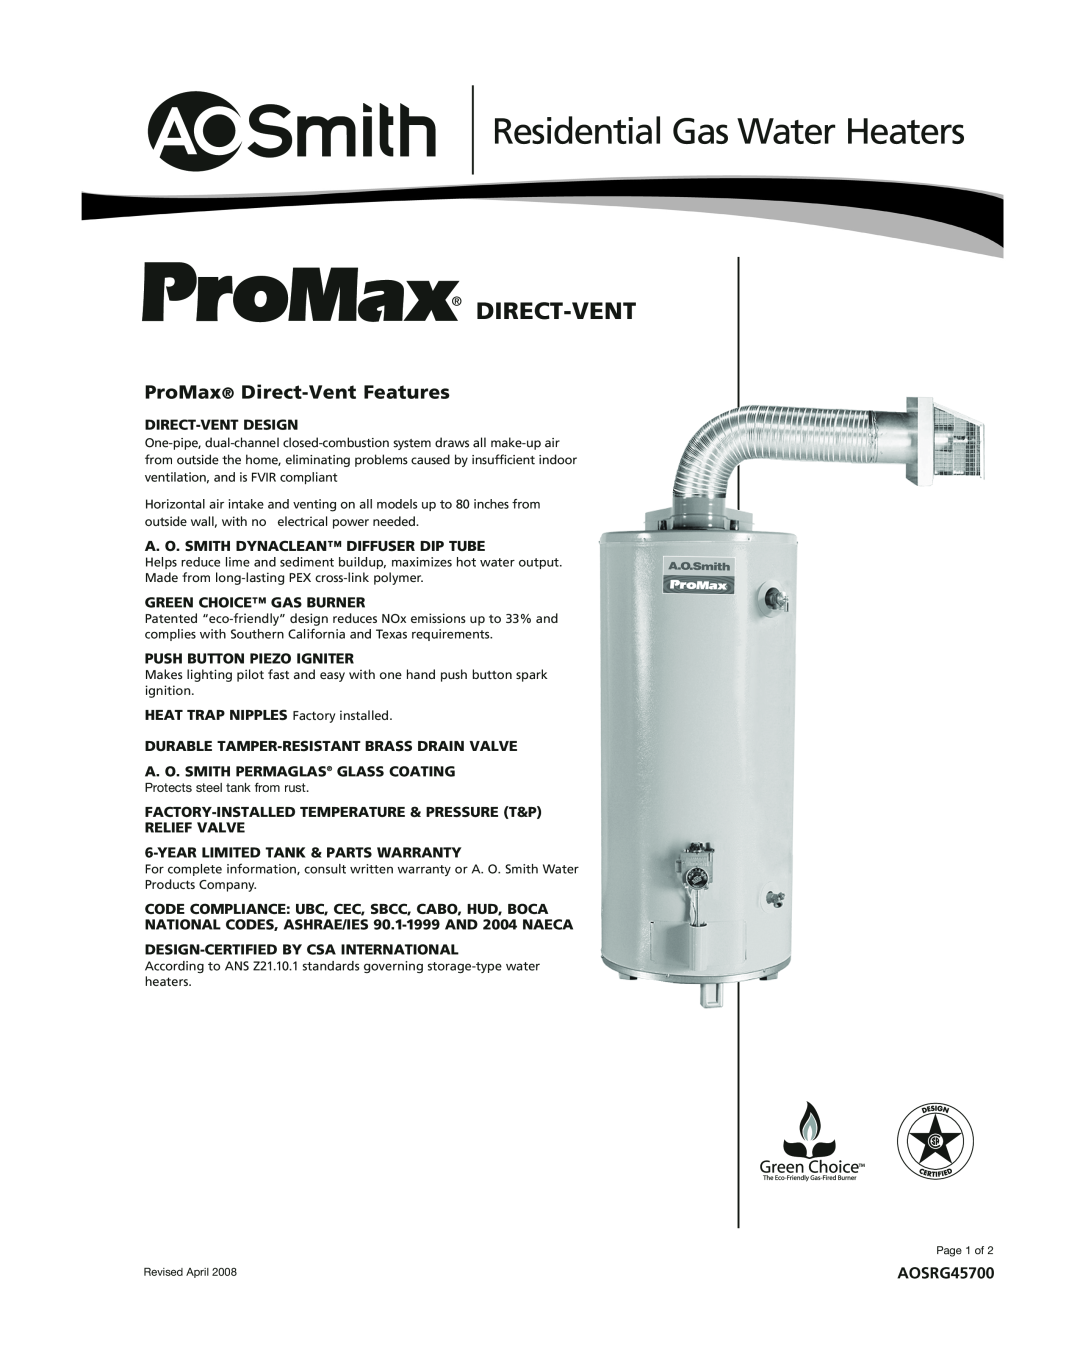 A.O. Smith AOSRG45700 warranty Residential Gas Water Heaters, ProMax Direct-Vent Features 